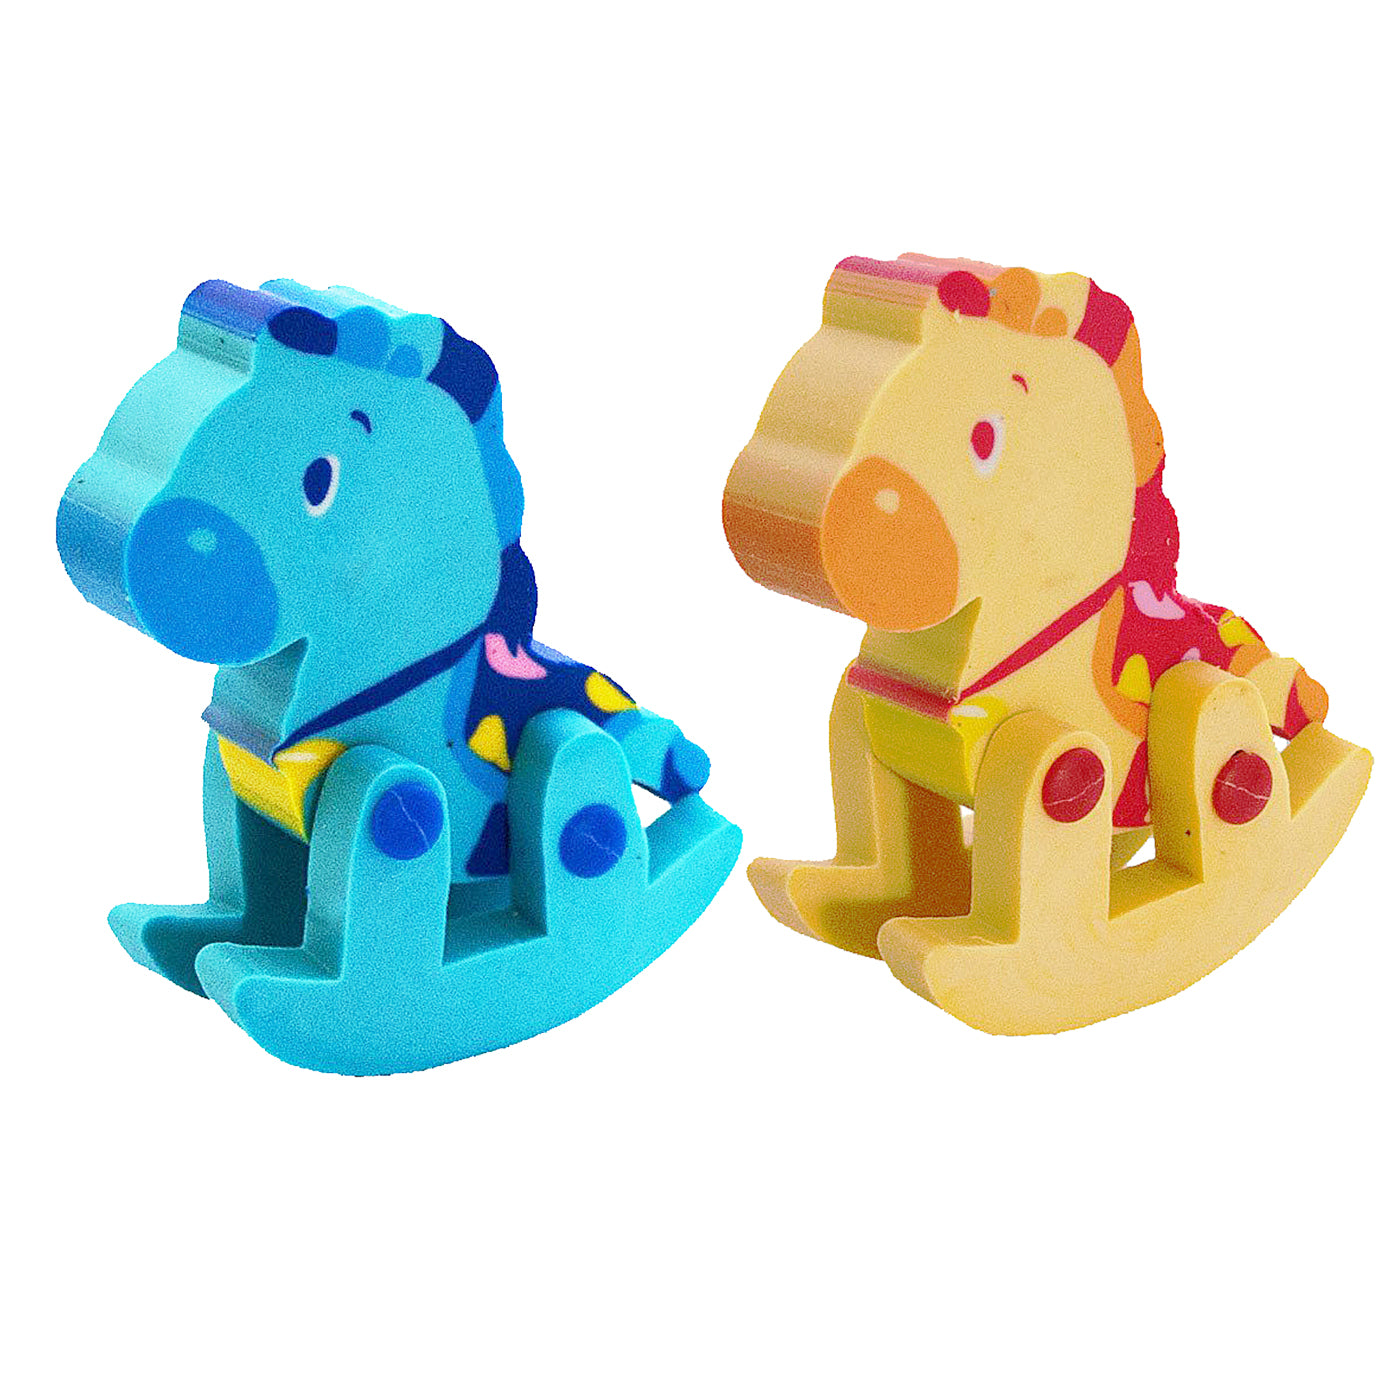 Fancy Eraser Rocking Horse Set of 2 Blue and Yellow